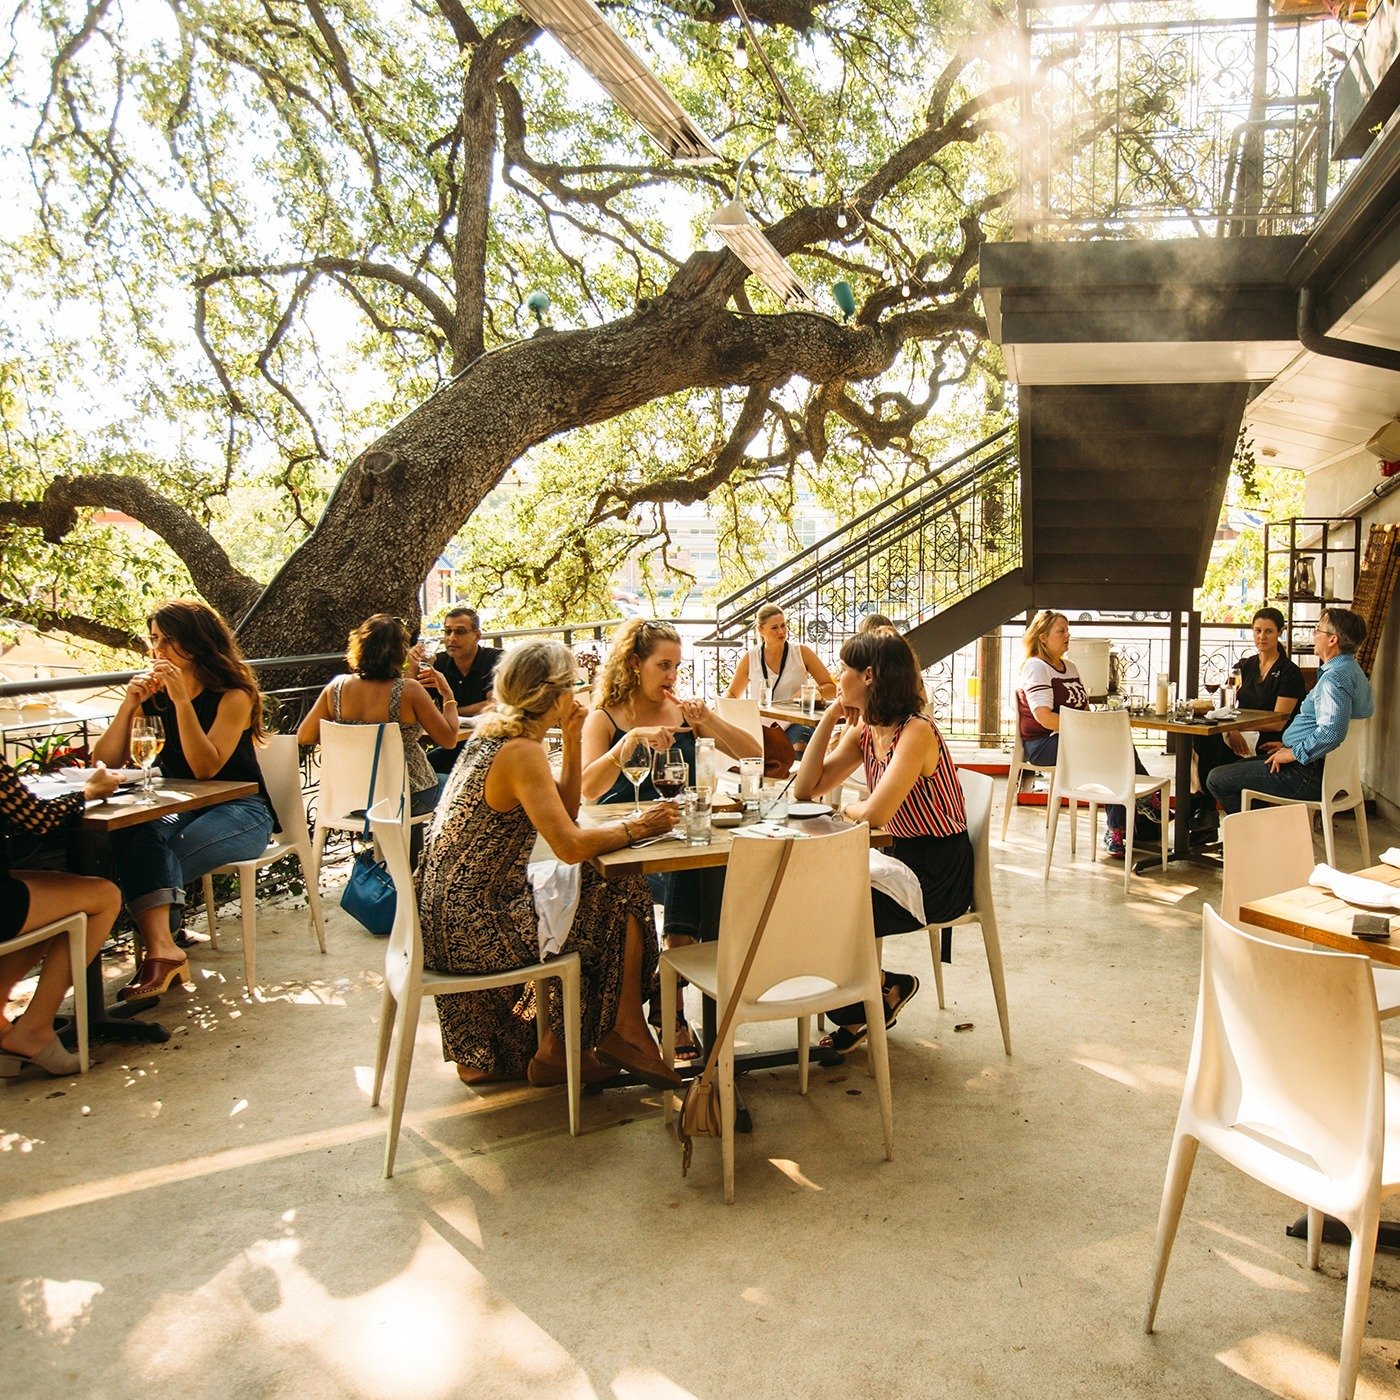 Gloomy days have us dreaming of sunny skies and patio vibes! Who else is craving some sun on one of Austin's best restaurant patios, soaking up rays with mouthwatering food and refreshing cocktails? 

See what restaurants and bars are already signed 